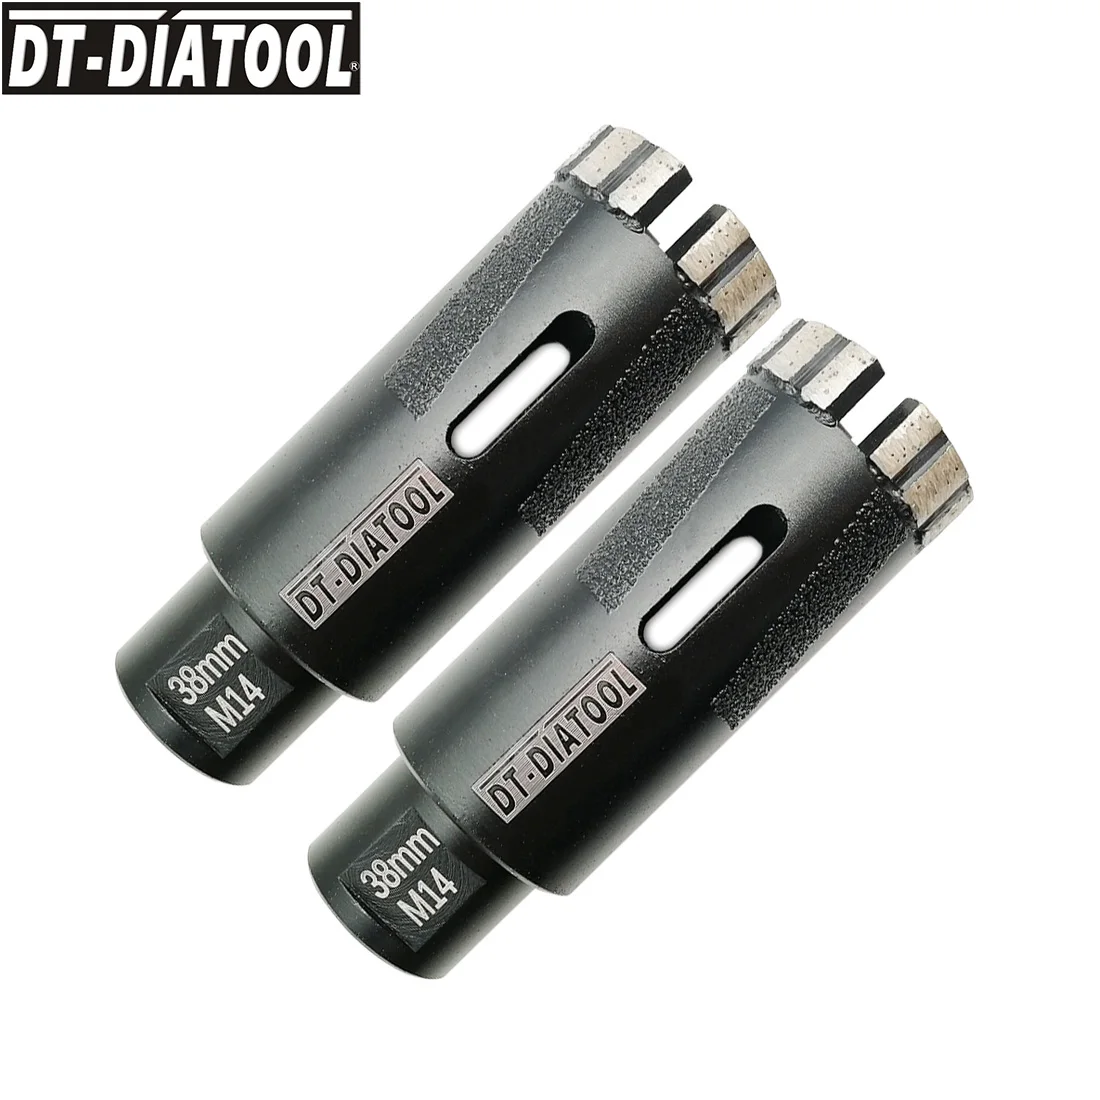 DT-DIATOOL 2pieces Dia 38mm Laser Welded Diamond Dry Drilling Hole Saw Core Bits With Side Protection M14 Connection Dry or Wet